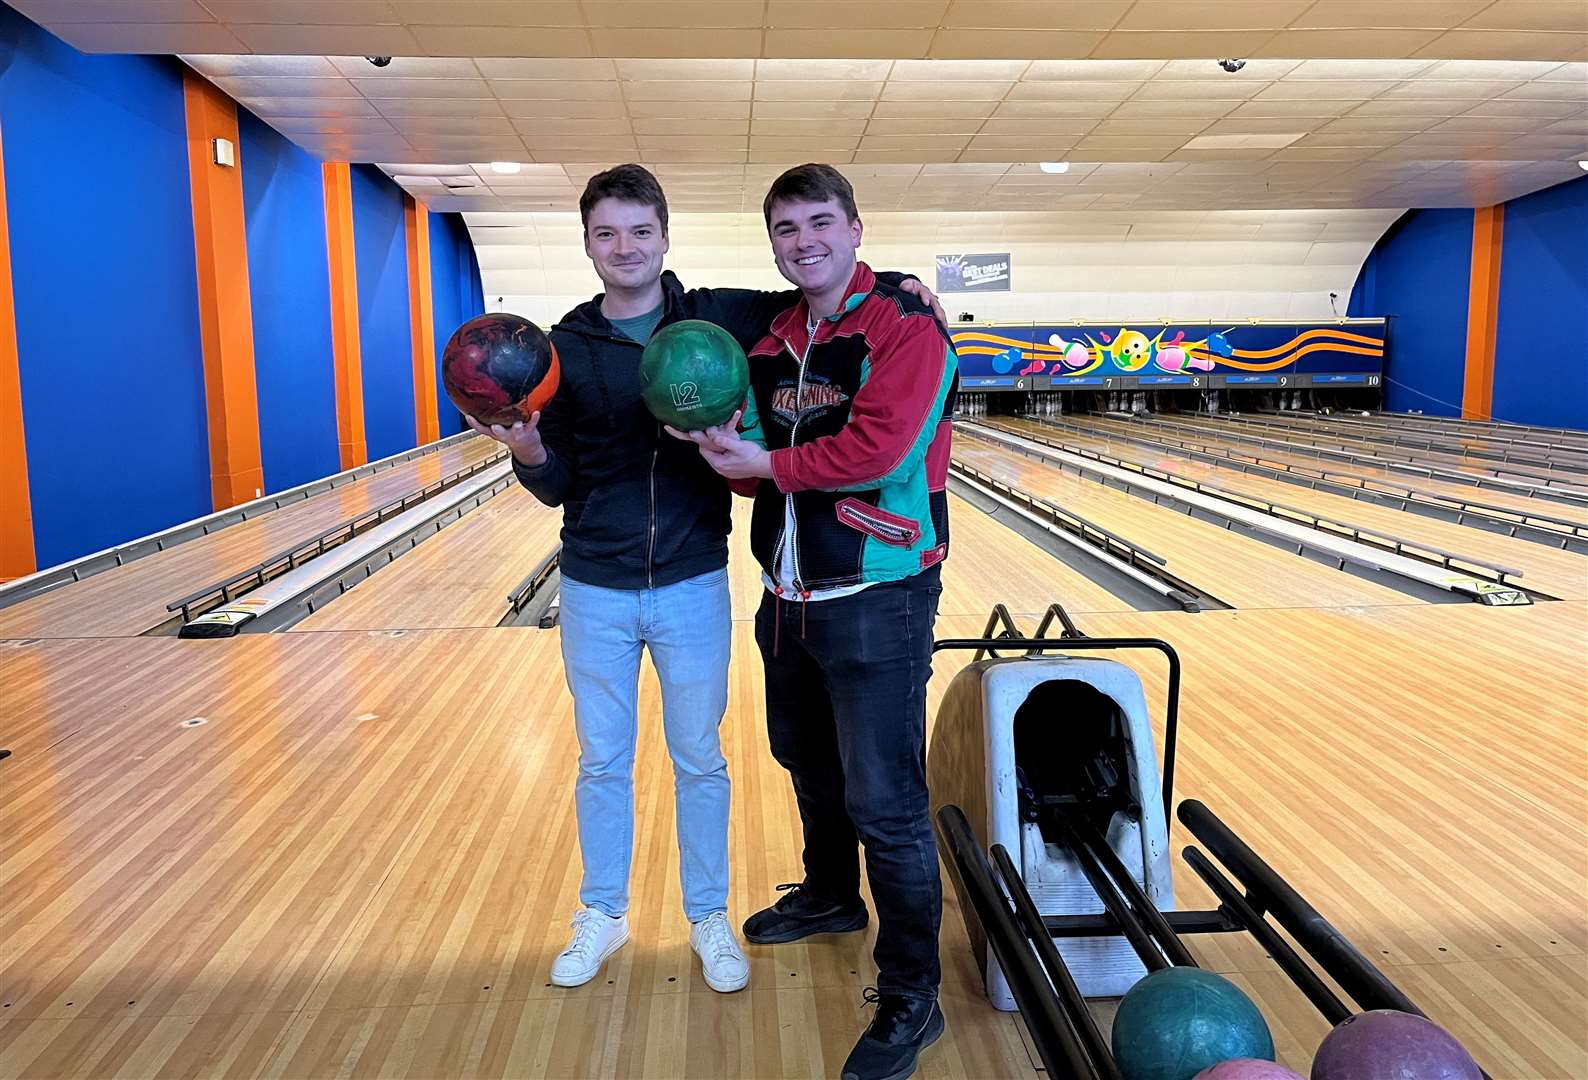 Reporters James Pallant and Max Chesson went to the poorly rated MFA Bowl in Whitstable